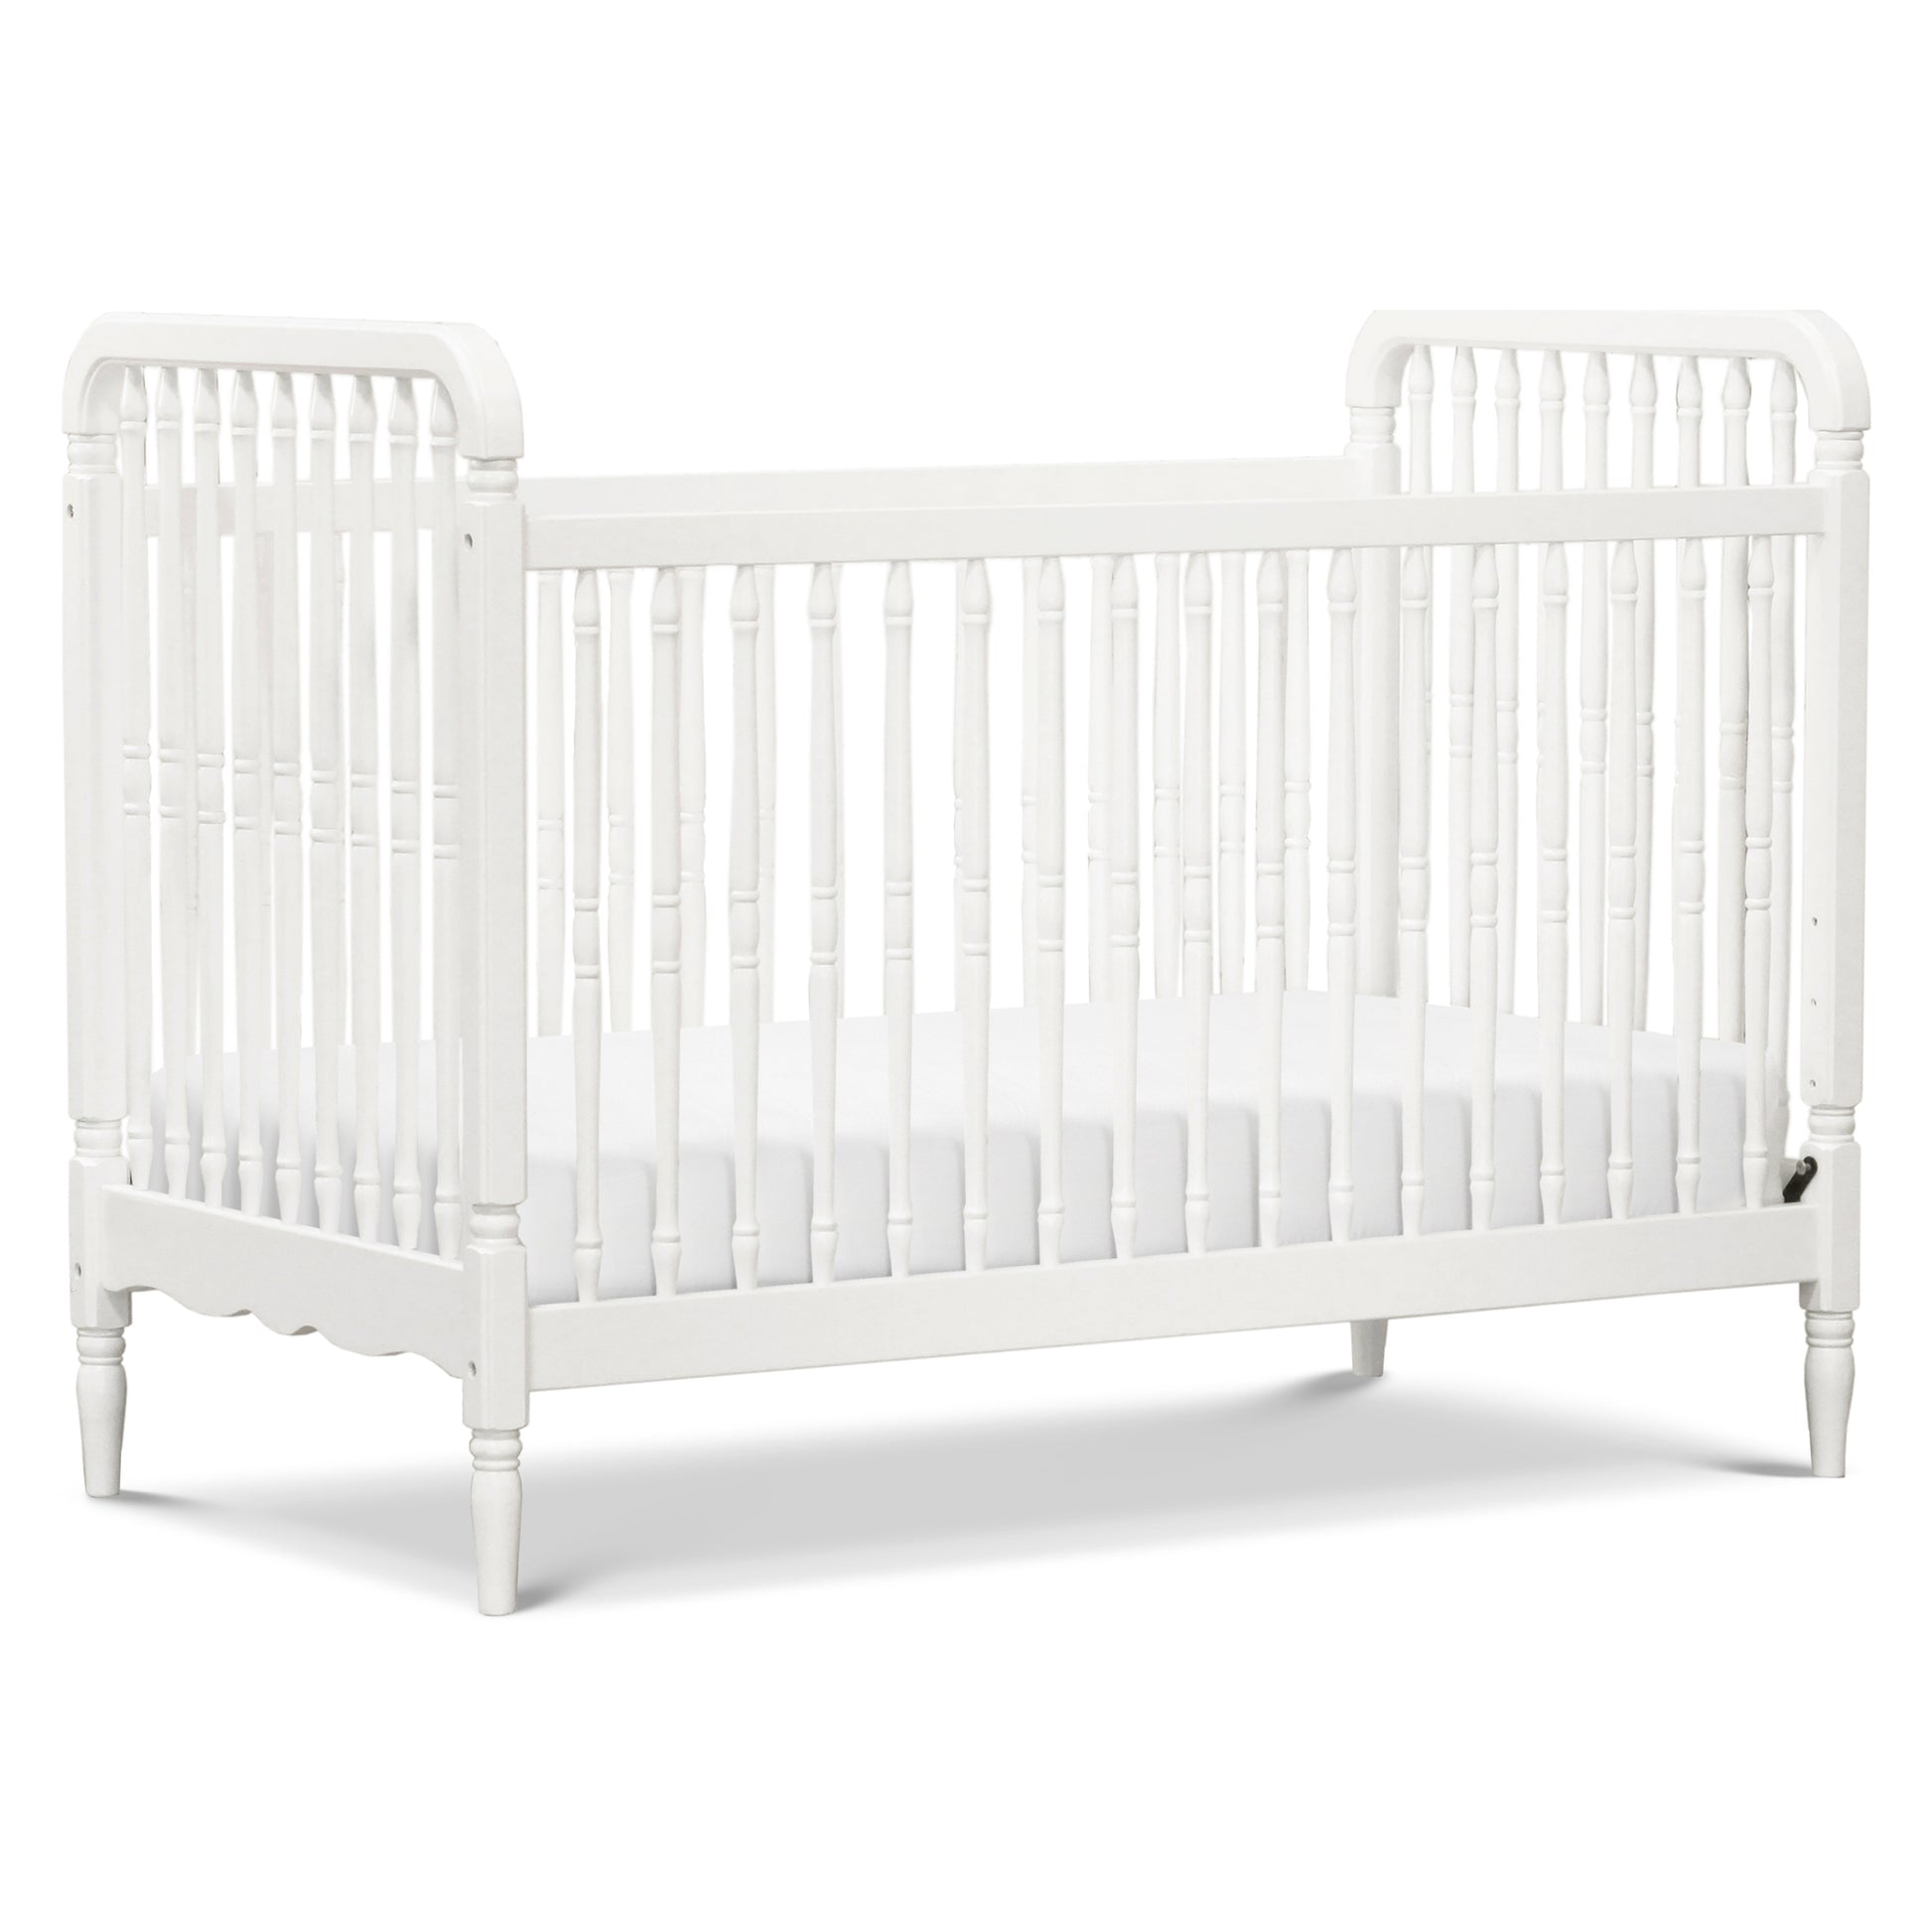 M7101RW,Liberty 3-in-1 Convertible Spindle Crib w/Toddler Bed Conversion Kit in Warm White